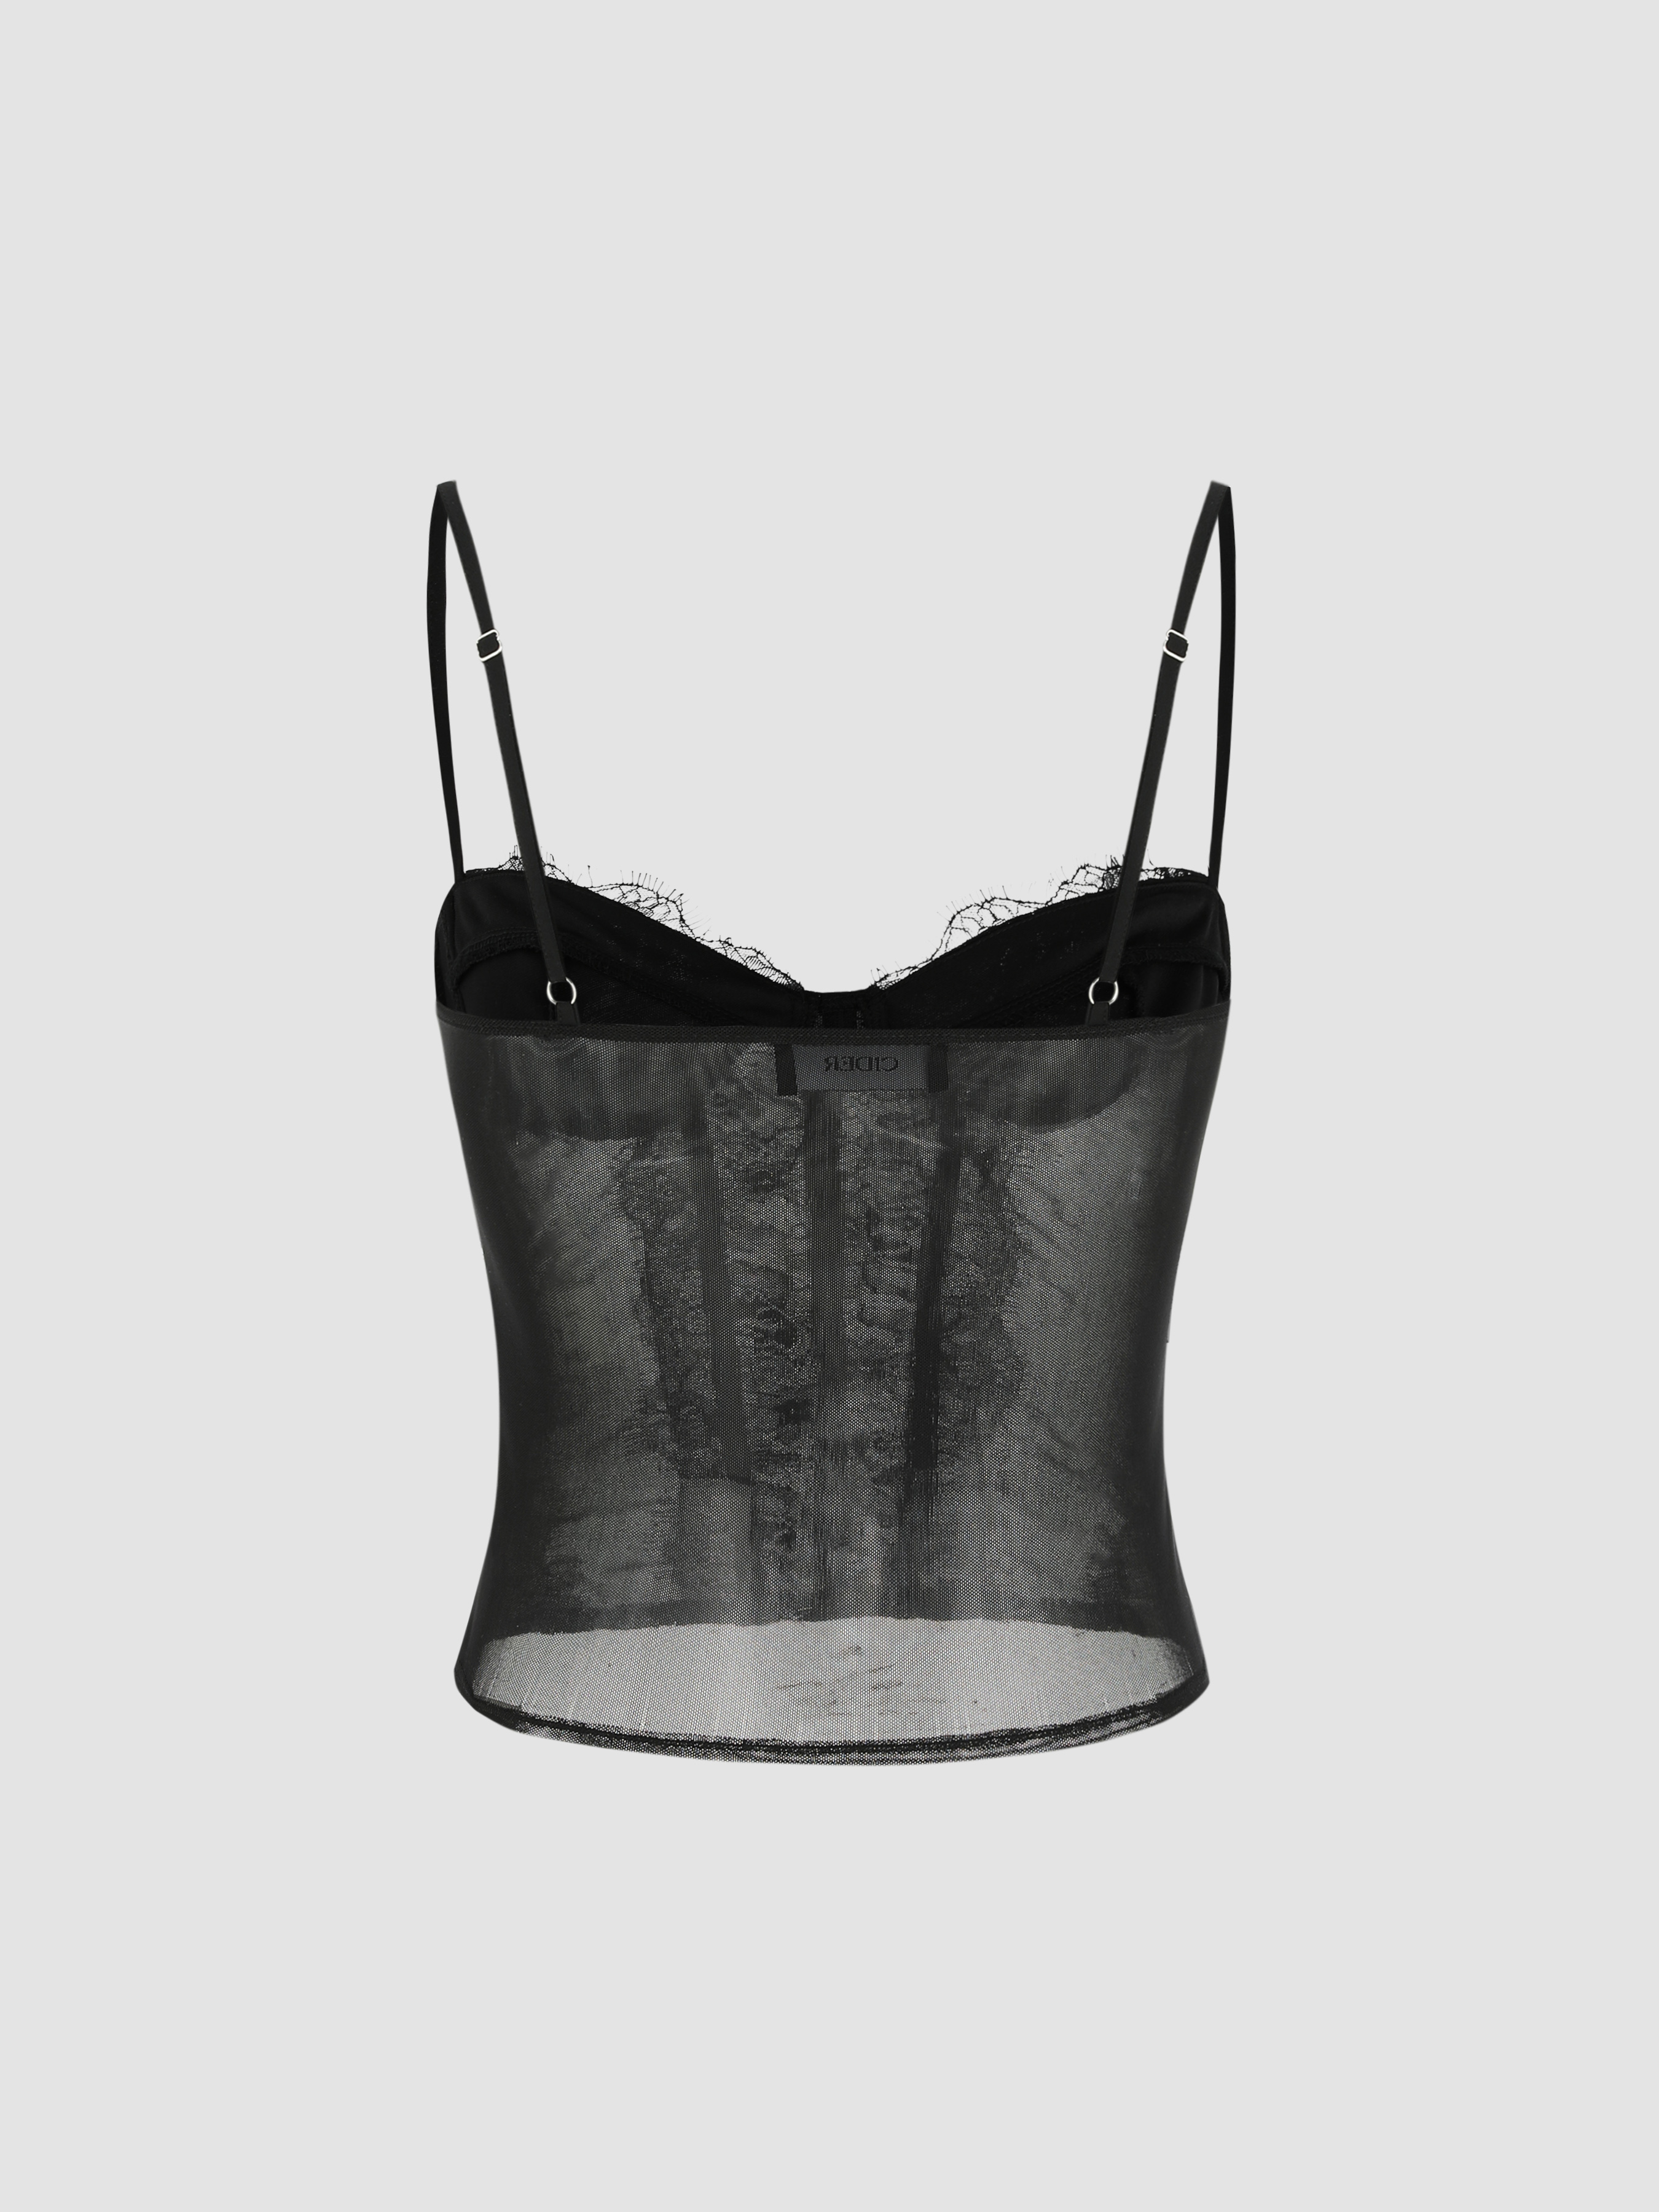 Lace Sheer Cami Top - Cider